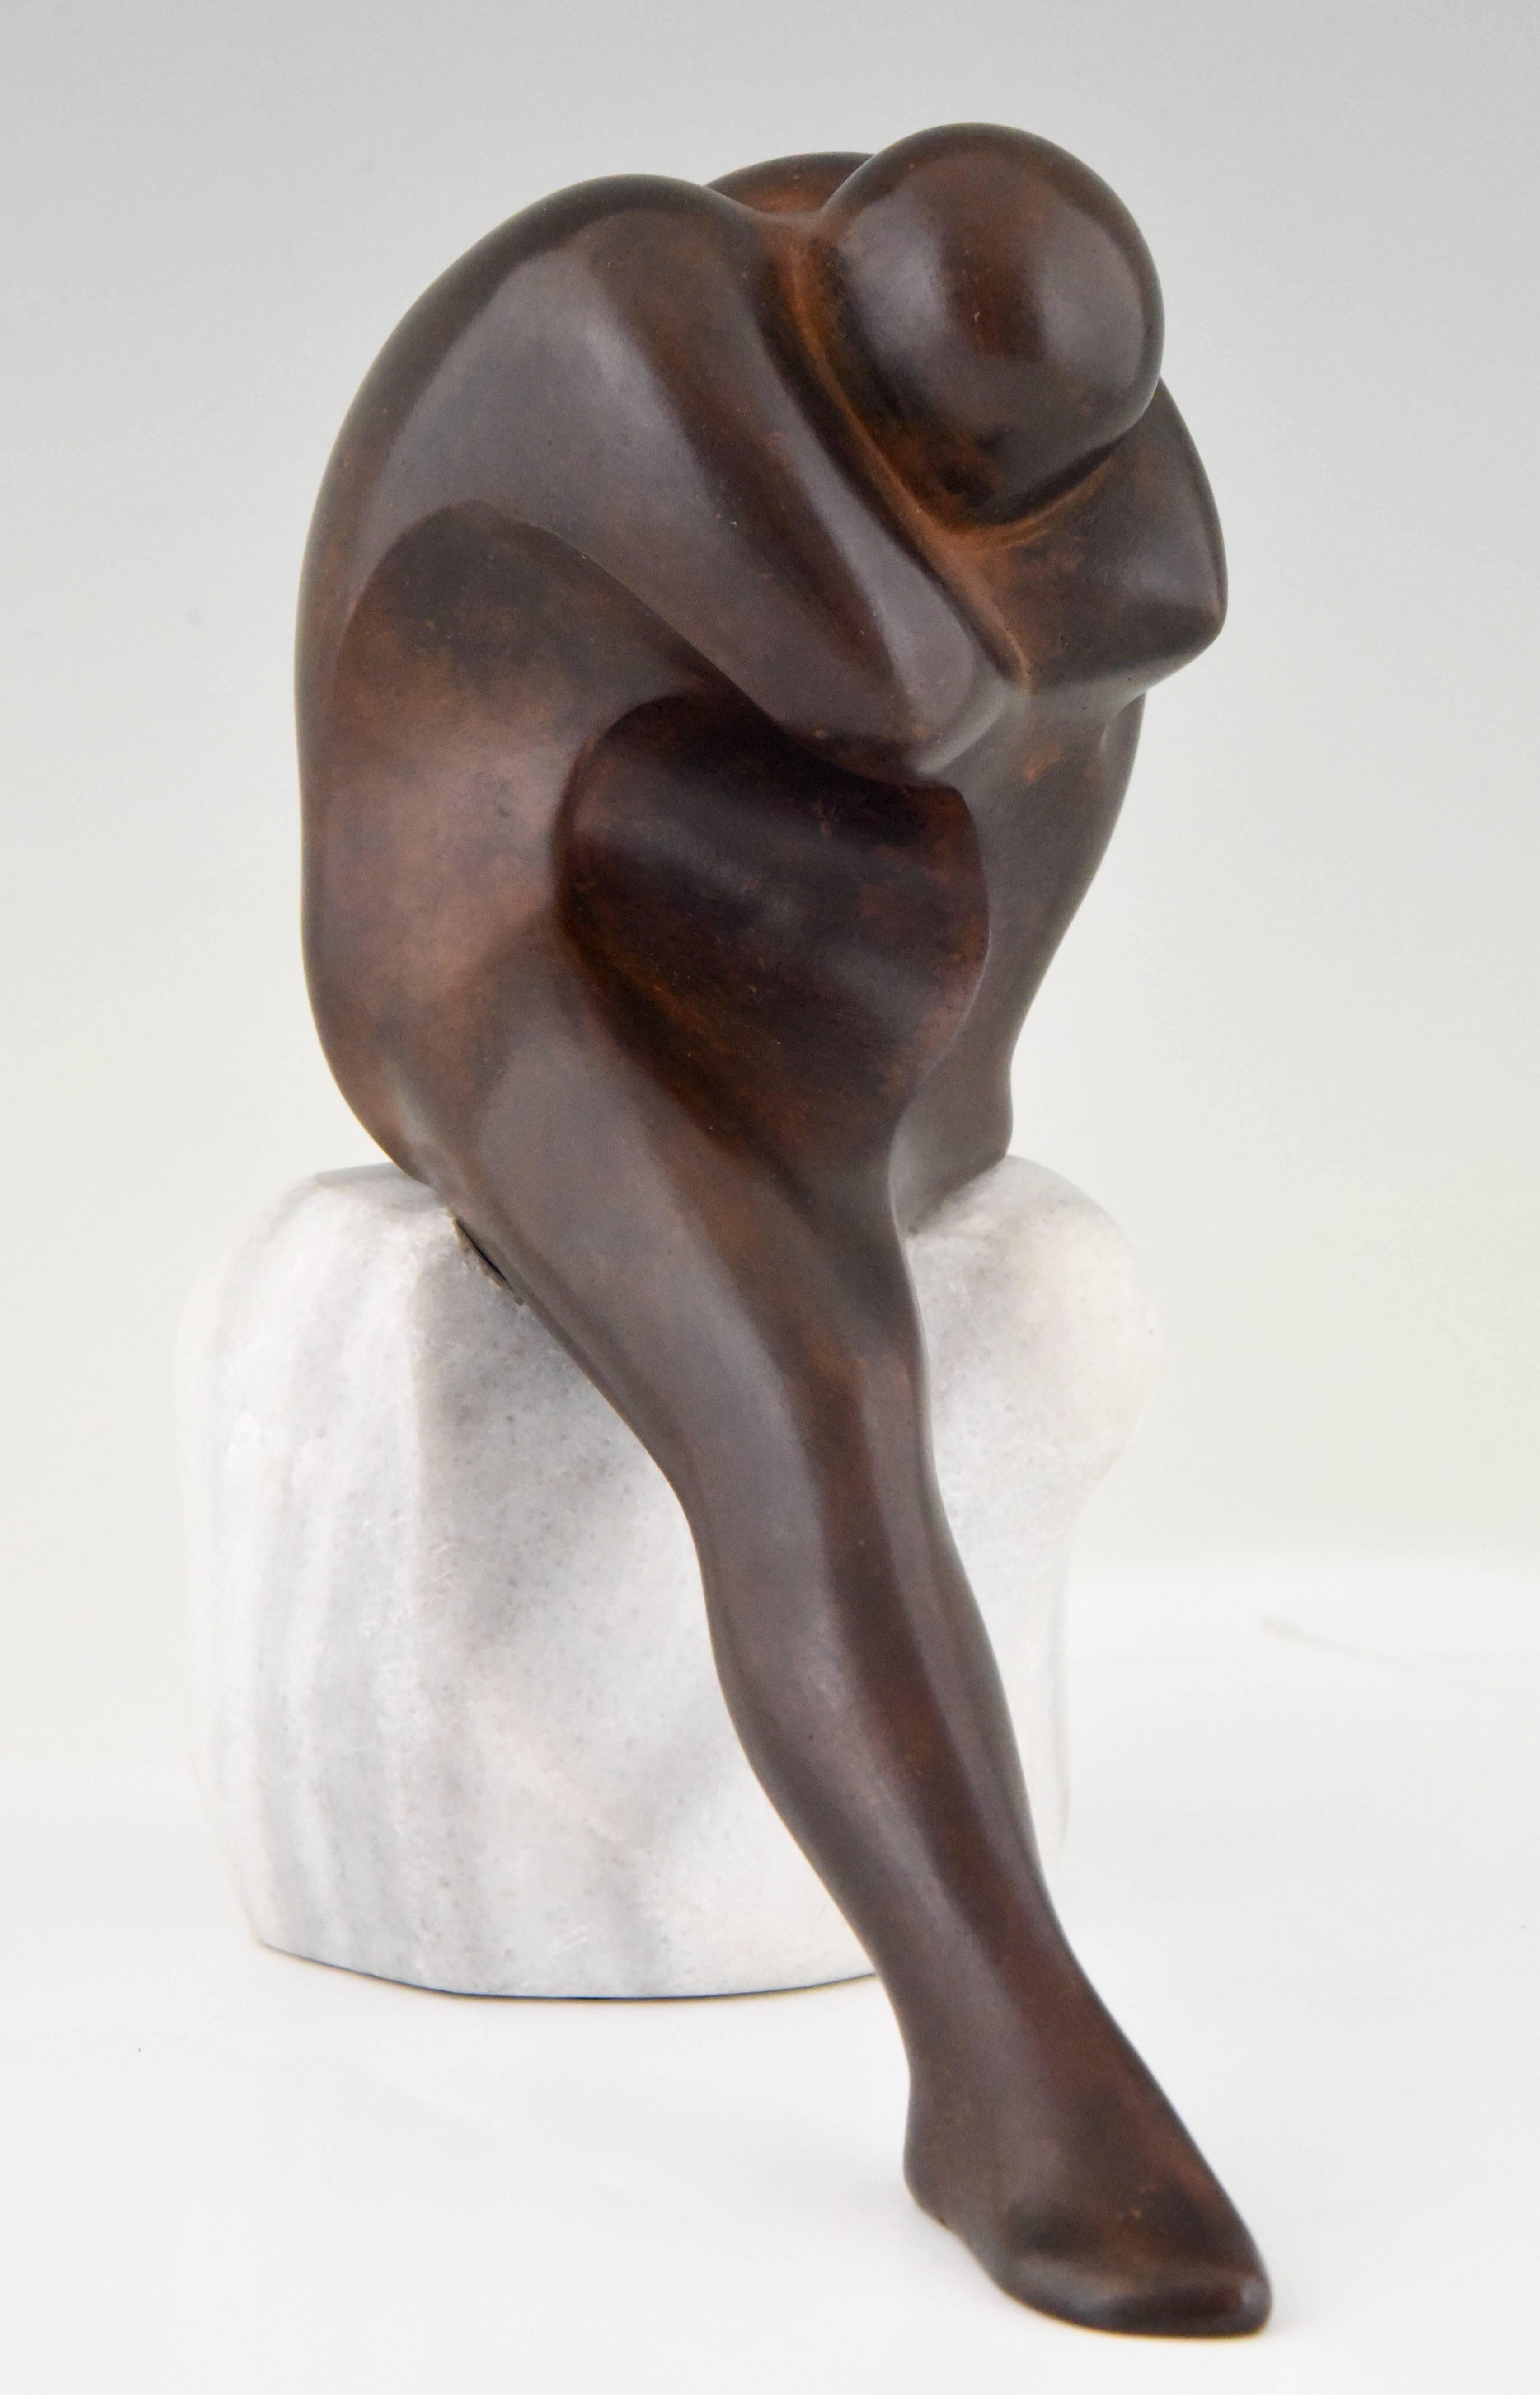 Mid-Century Modern L' Uomo, Bronze Sculpture of a Sitting Man Marble Base by Selvino Cavezza, 1985